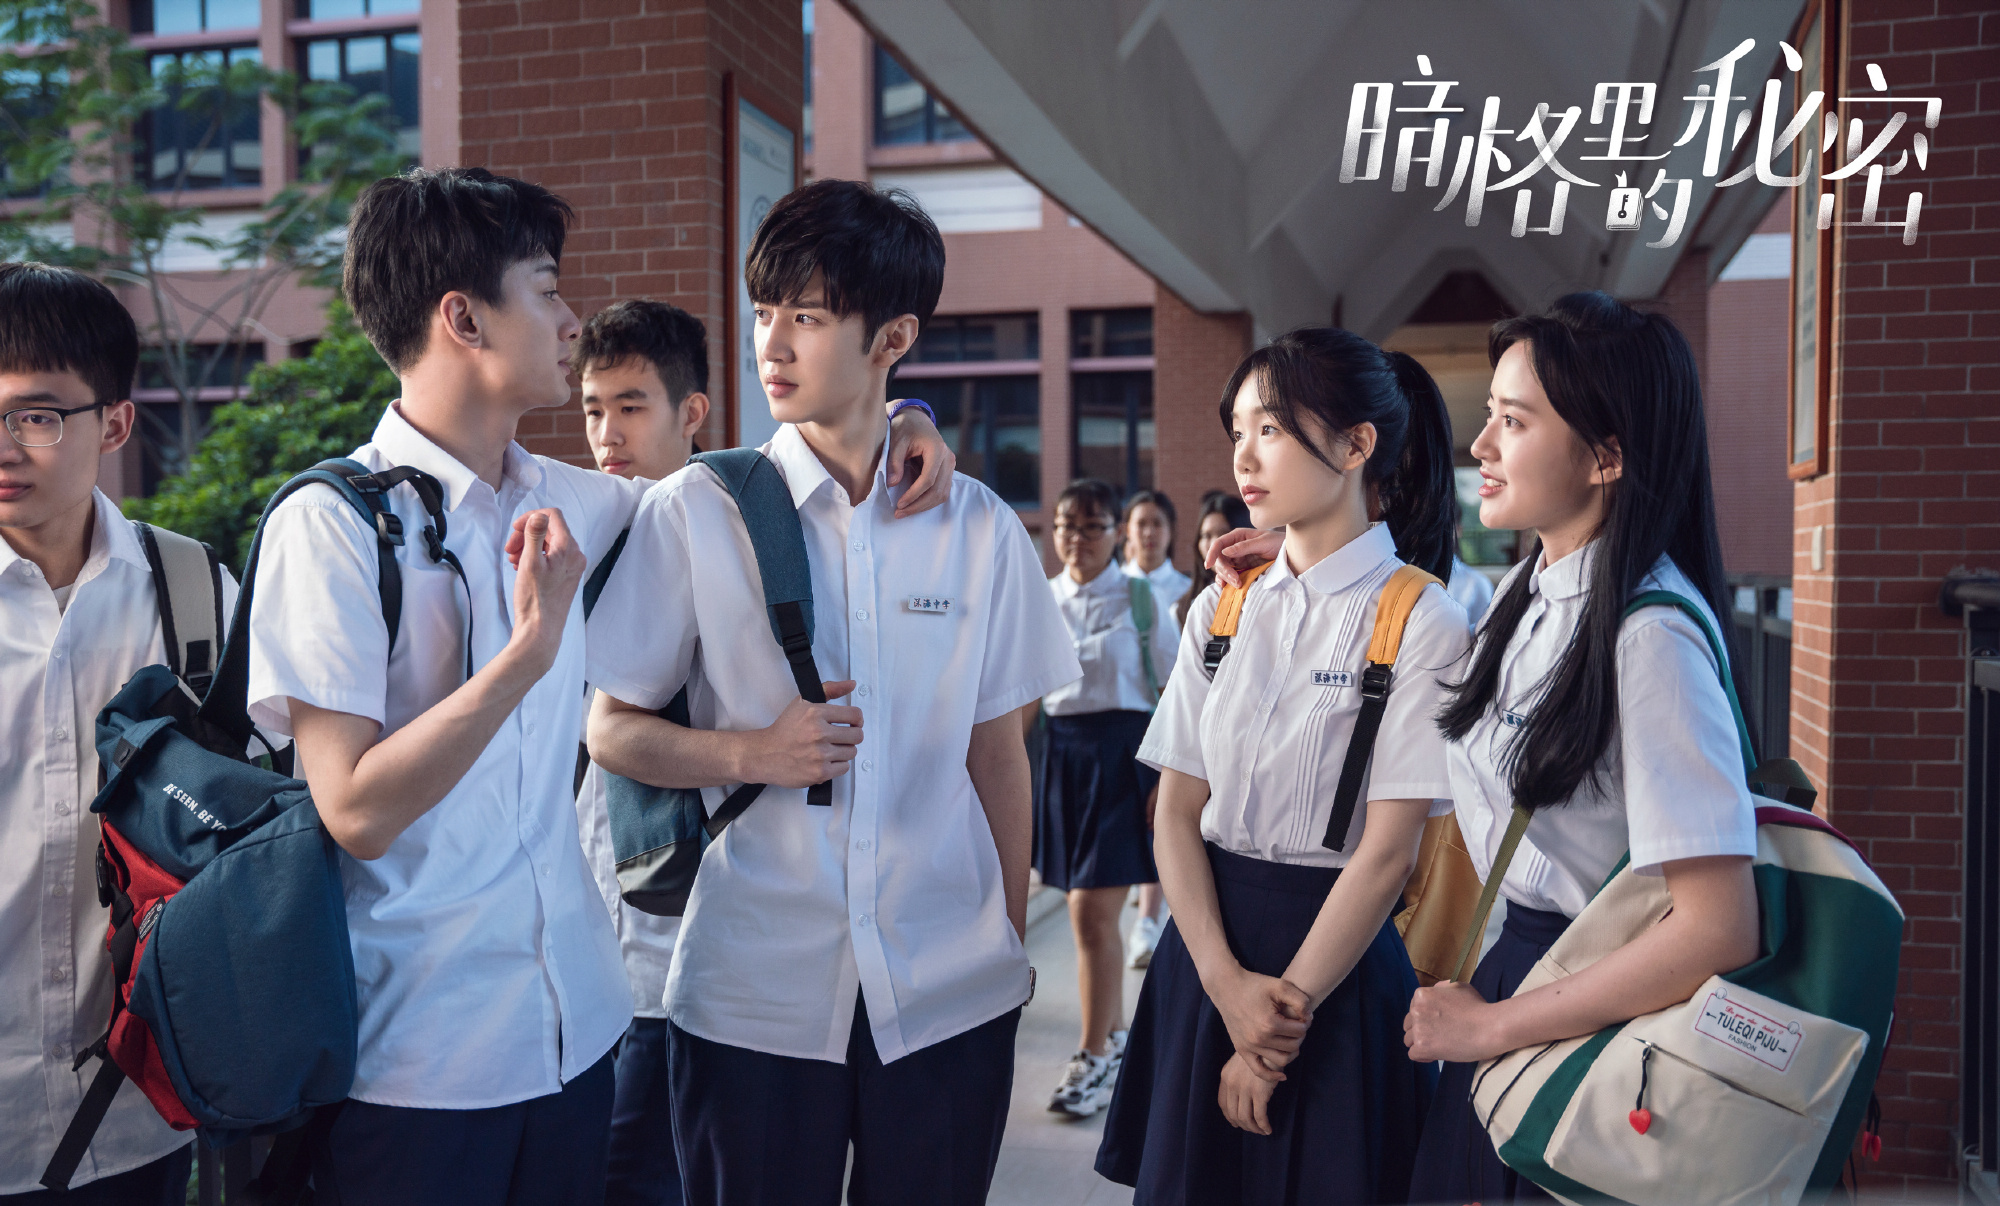 C-Drama Mid-Series Spotlight: "Our Secrets" Taps On Wistful Young Love  Memories With Its Moodmaking Youth Story - kdramadiary